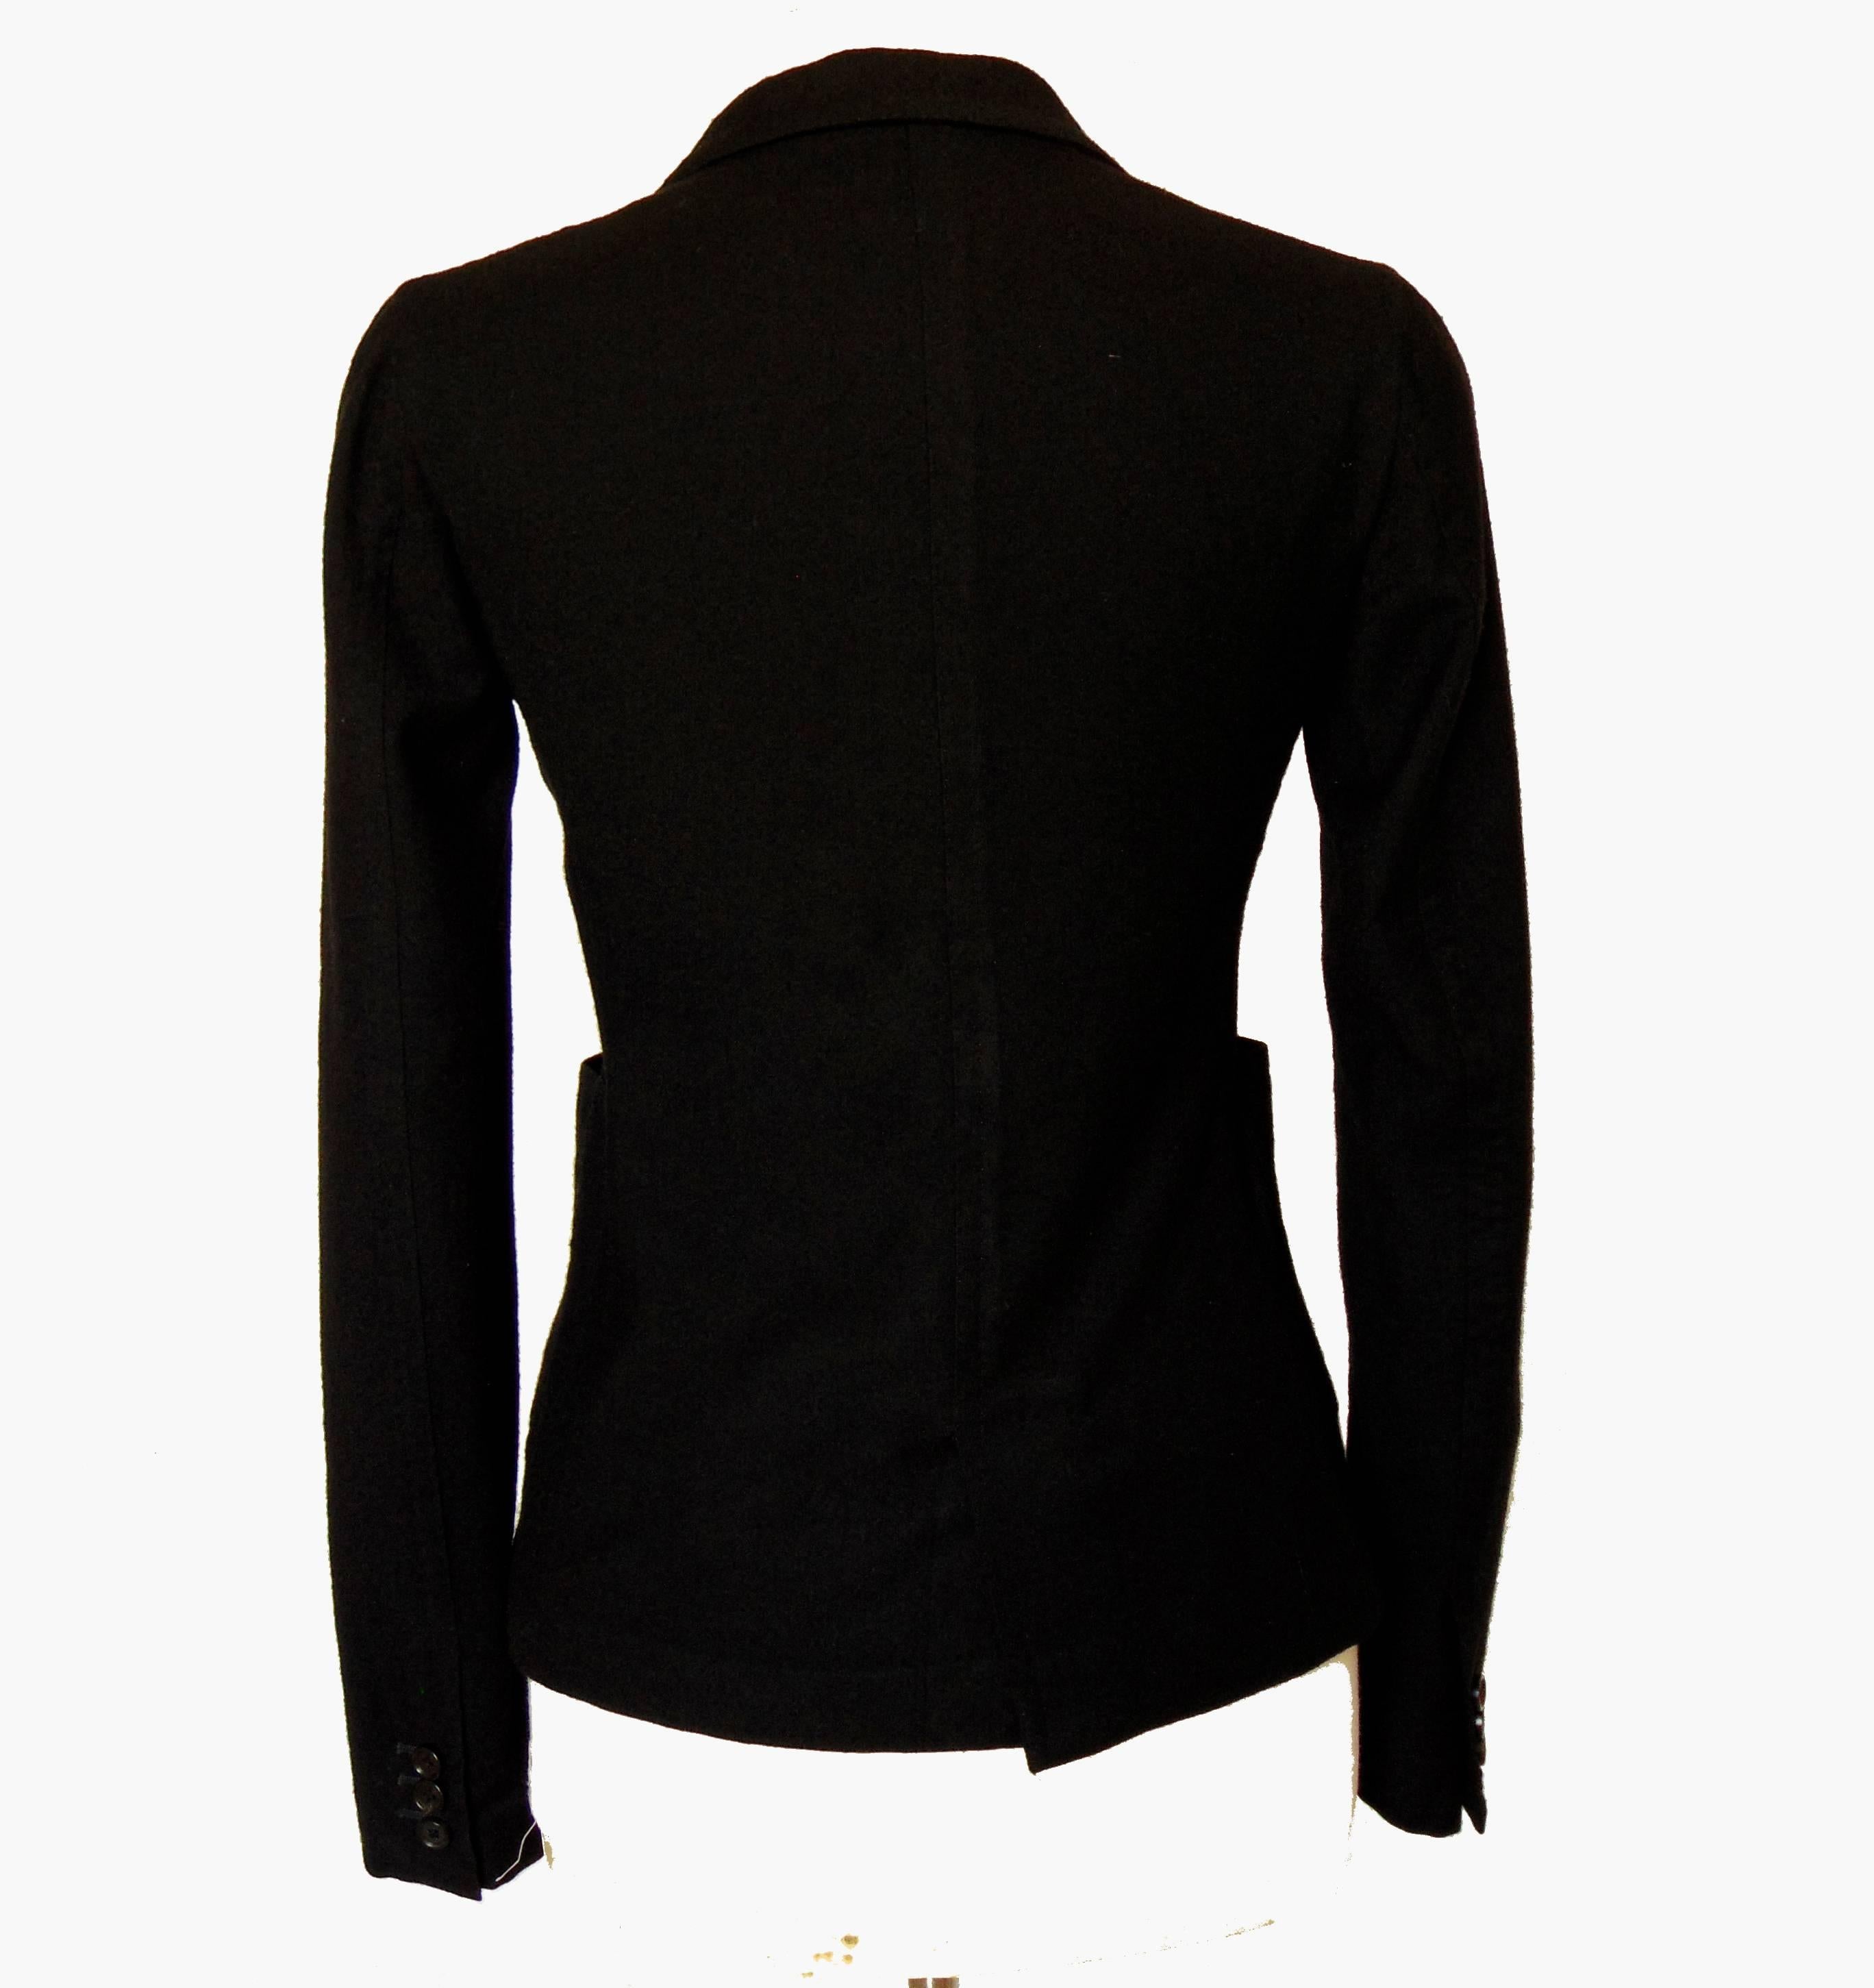 This classic jacket is made from a super soft boiled wool, is unlined.  In excellent pre-owned condition with minor signs of prior wear.  It measures, taken flat and doubled:
shoulders - 16